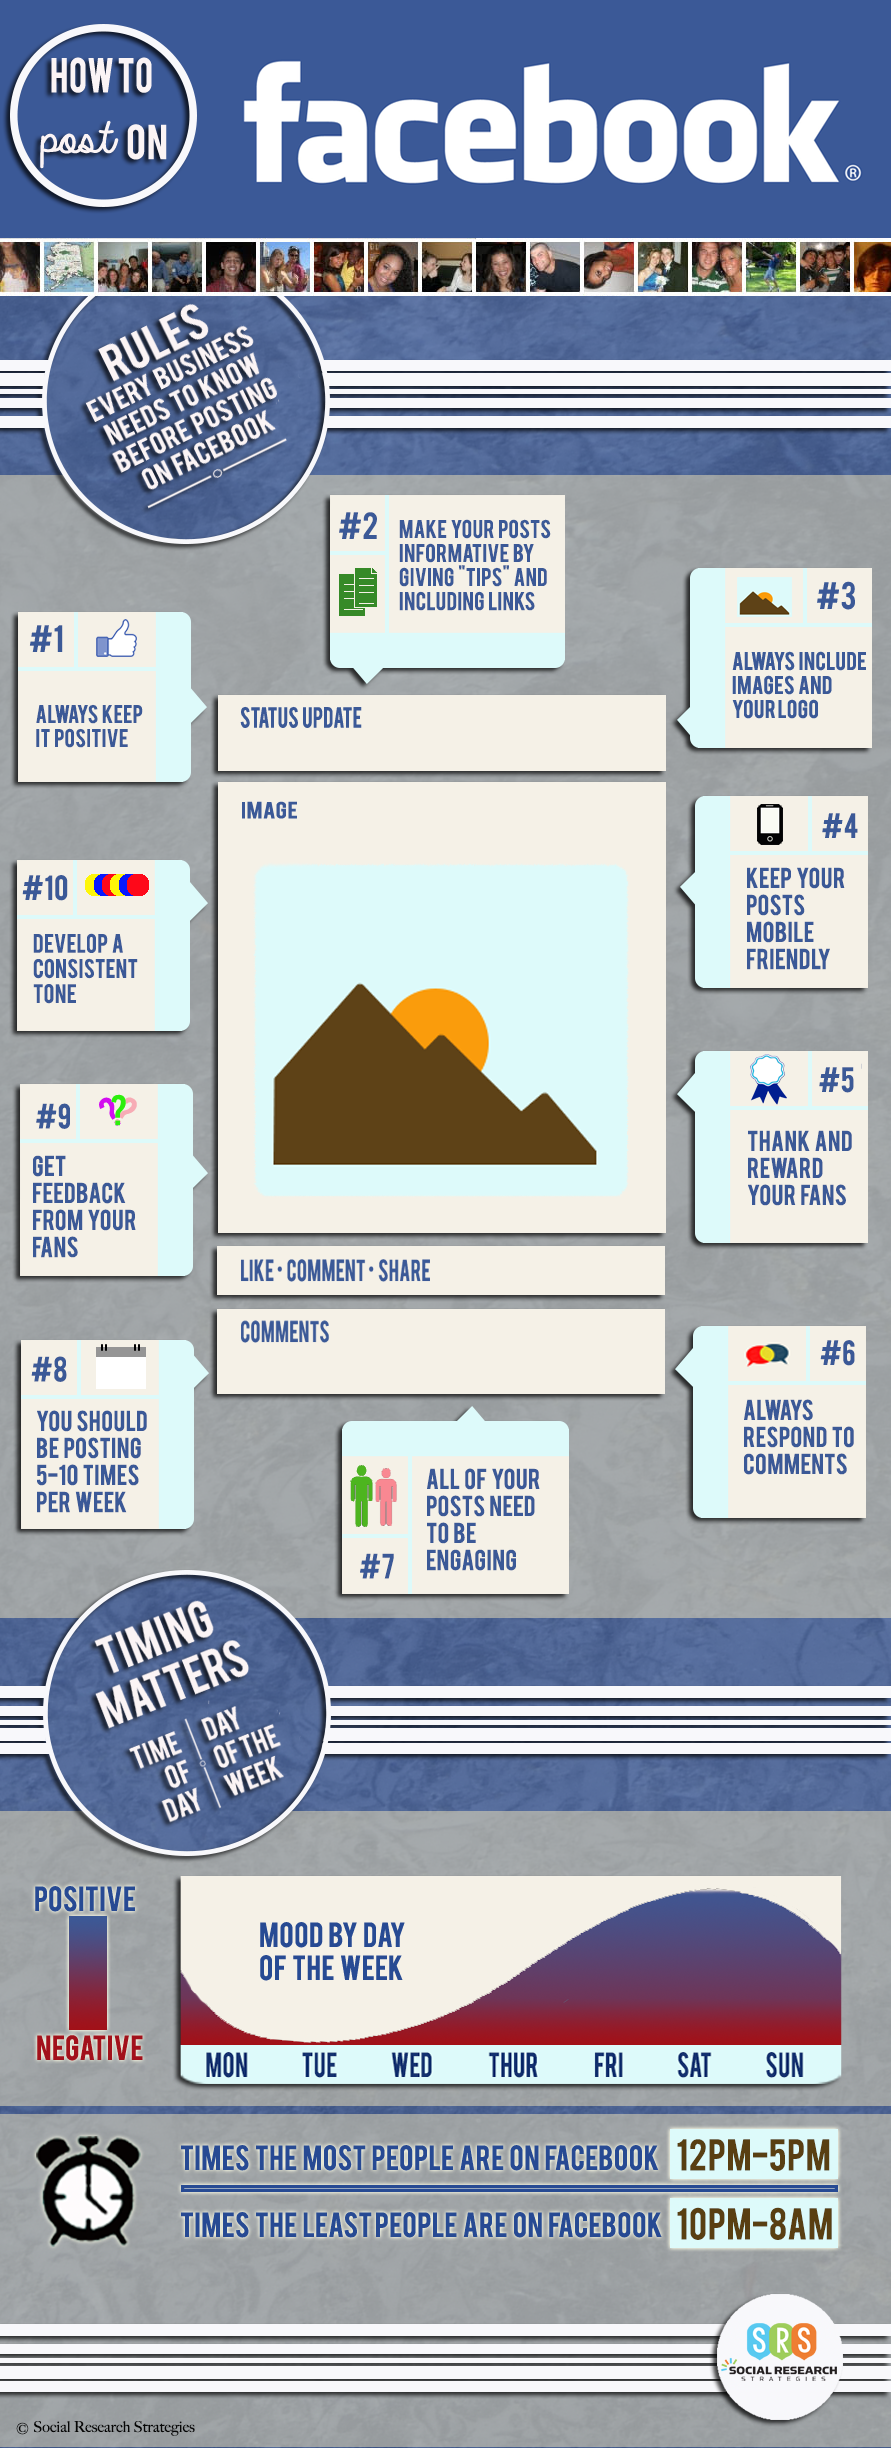 The 10 Rules That Every Business Needs To Know Before Posting Content On Facebook - infographic